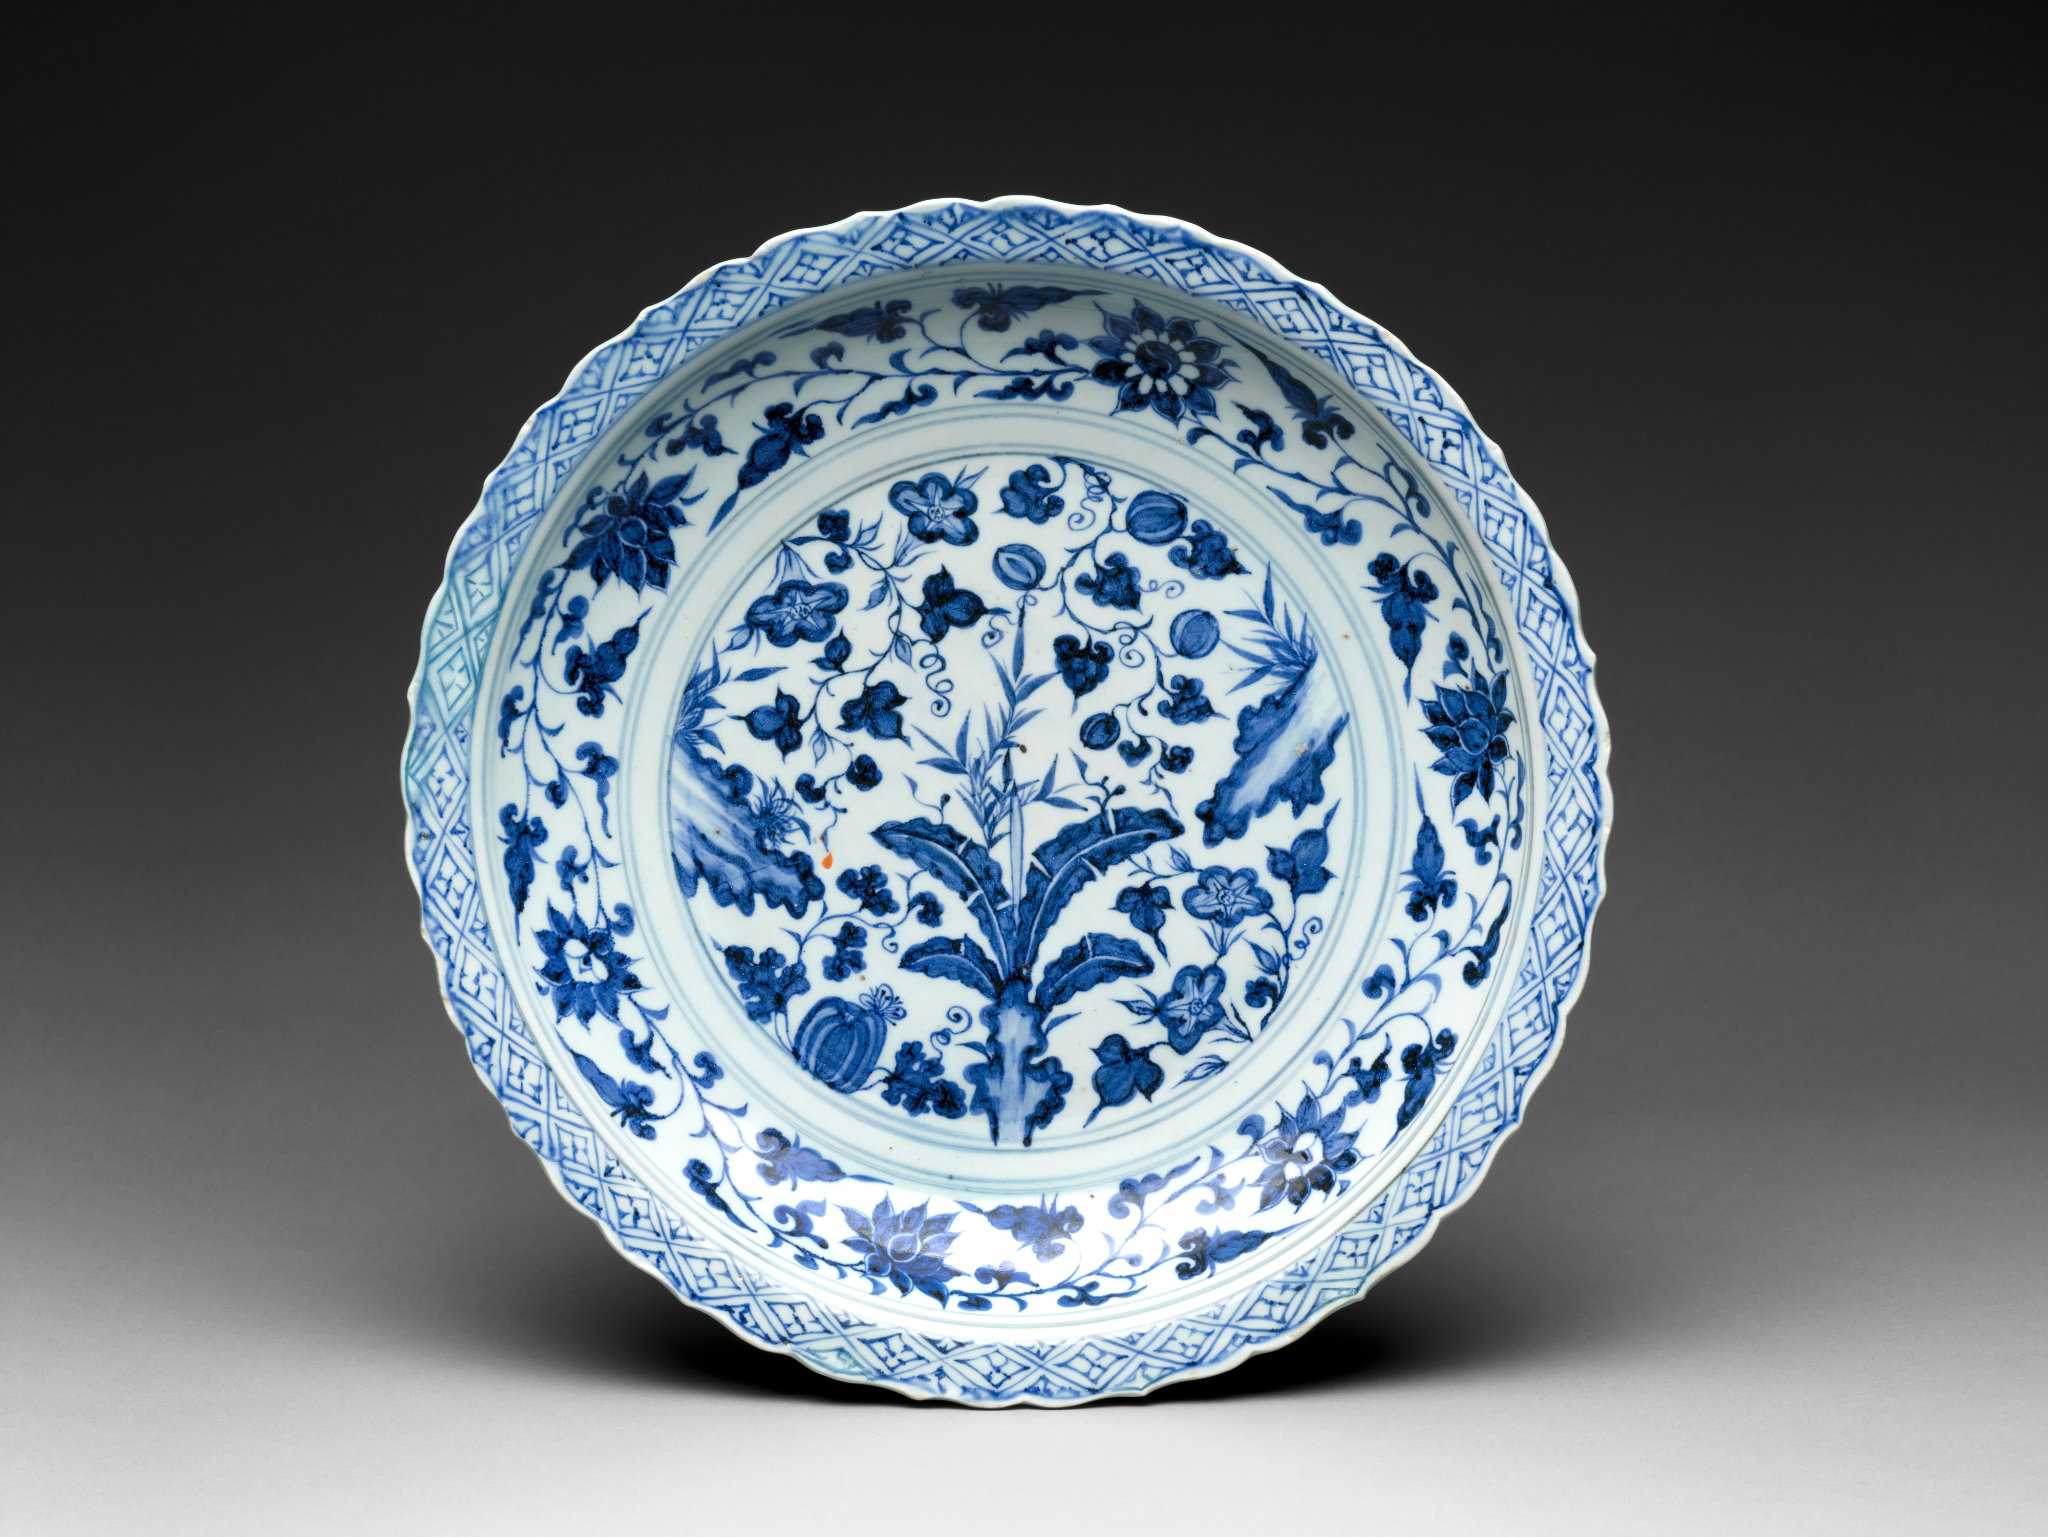 Foliated plate with rocks, plants, and melons, Yuan dynasty (1271–1368), 14th century